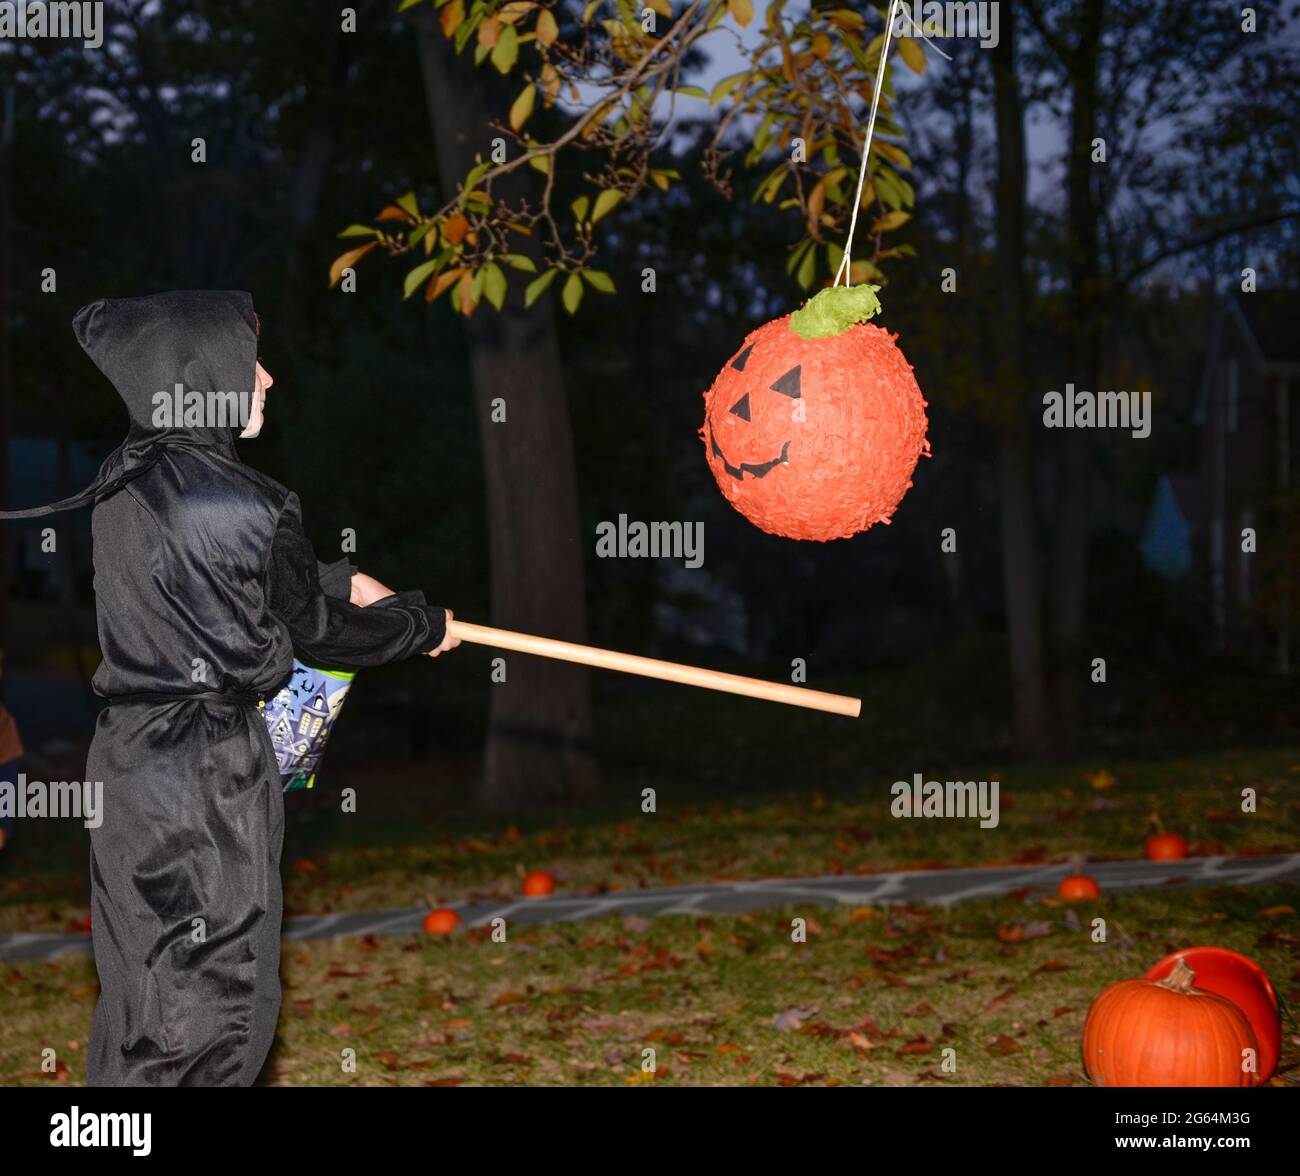 Boy in a black halloween costume hitting a pumpkin pinata with a stick, hanging from a tree outdoors at a party at night. Stock Photo